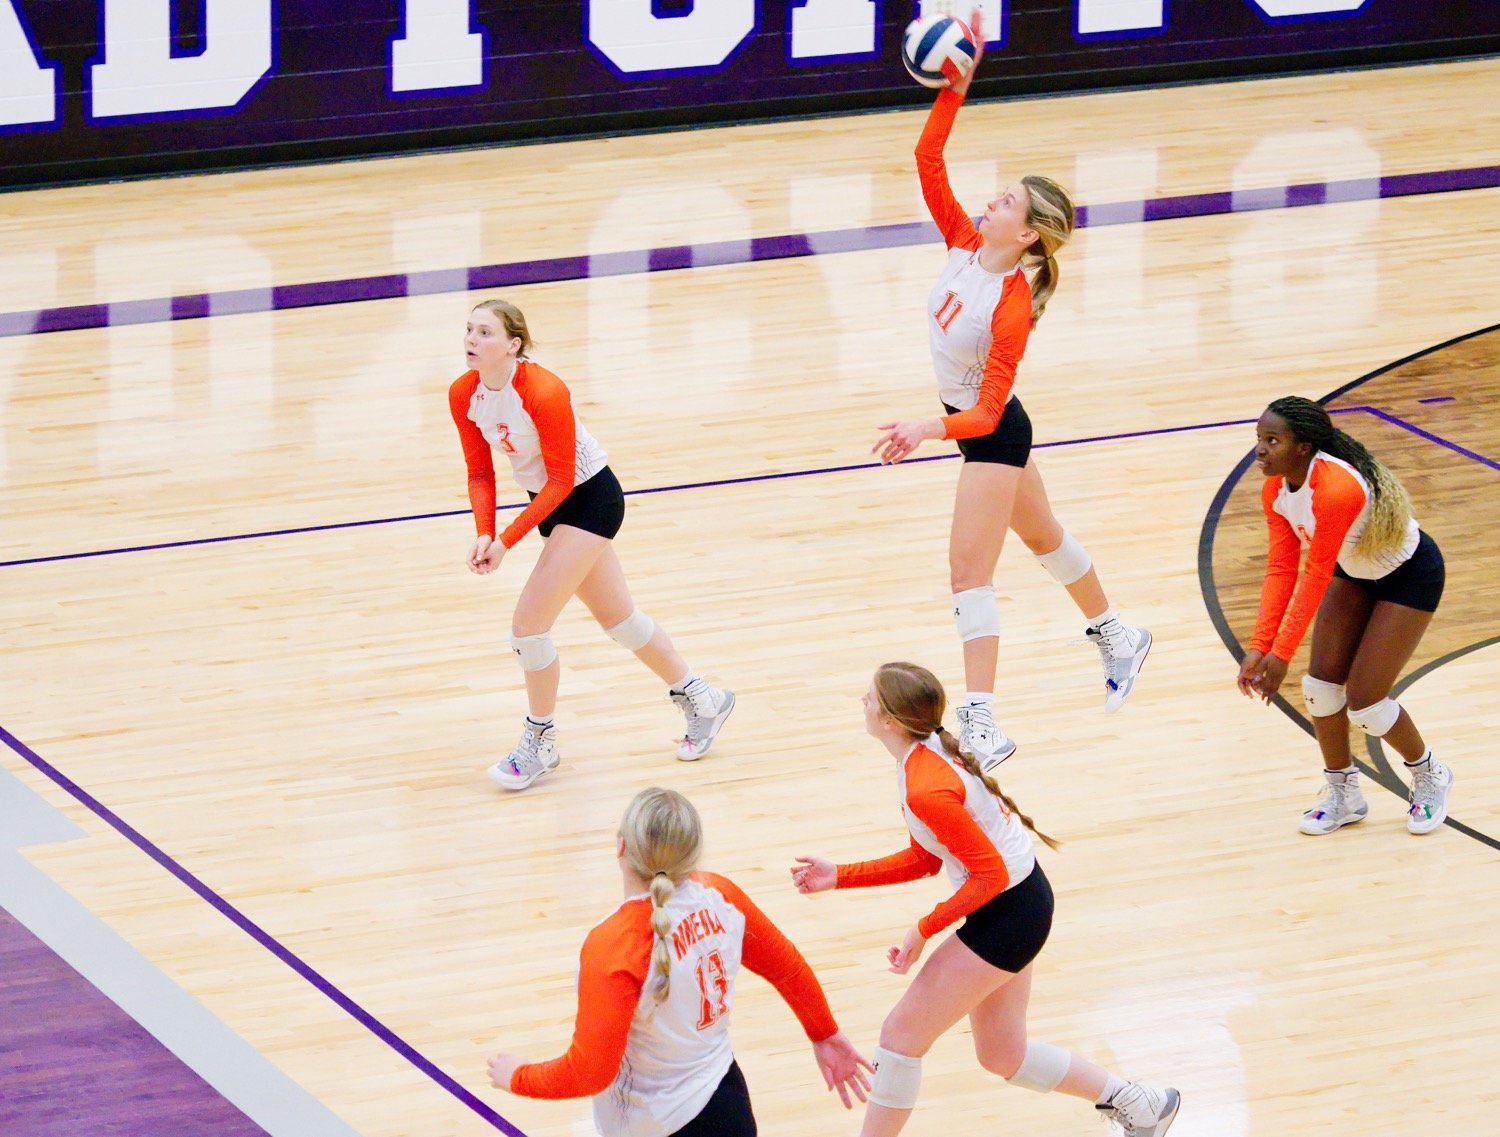 Clockwise from top left, Lady Jacket players Mylee Fischer, Olivia Hughes, Shylah Kratzmeyer, Macy Fischer and Jocelyn Whitehead spread across the floor as Hughes takes a swipe at the ball. [view more volleyball shots]